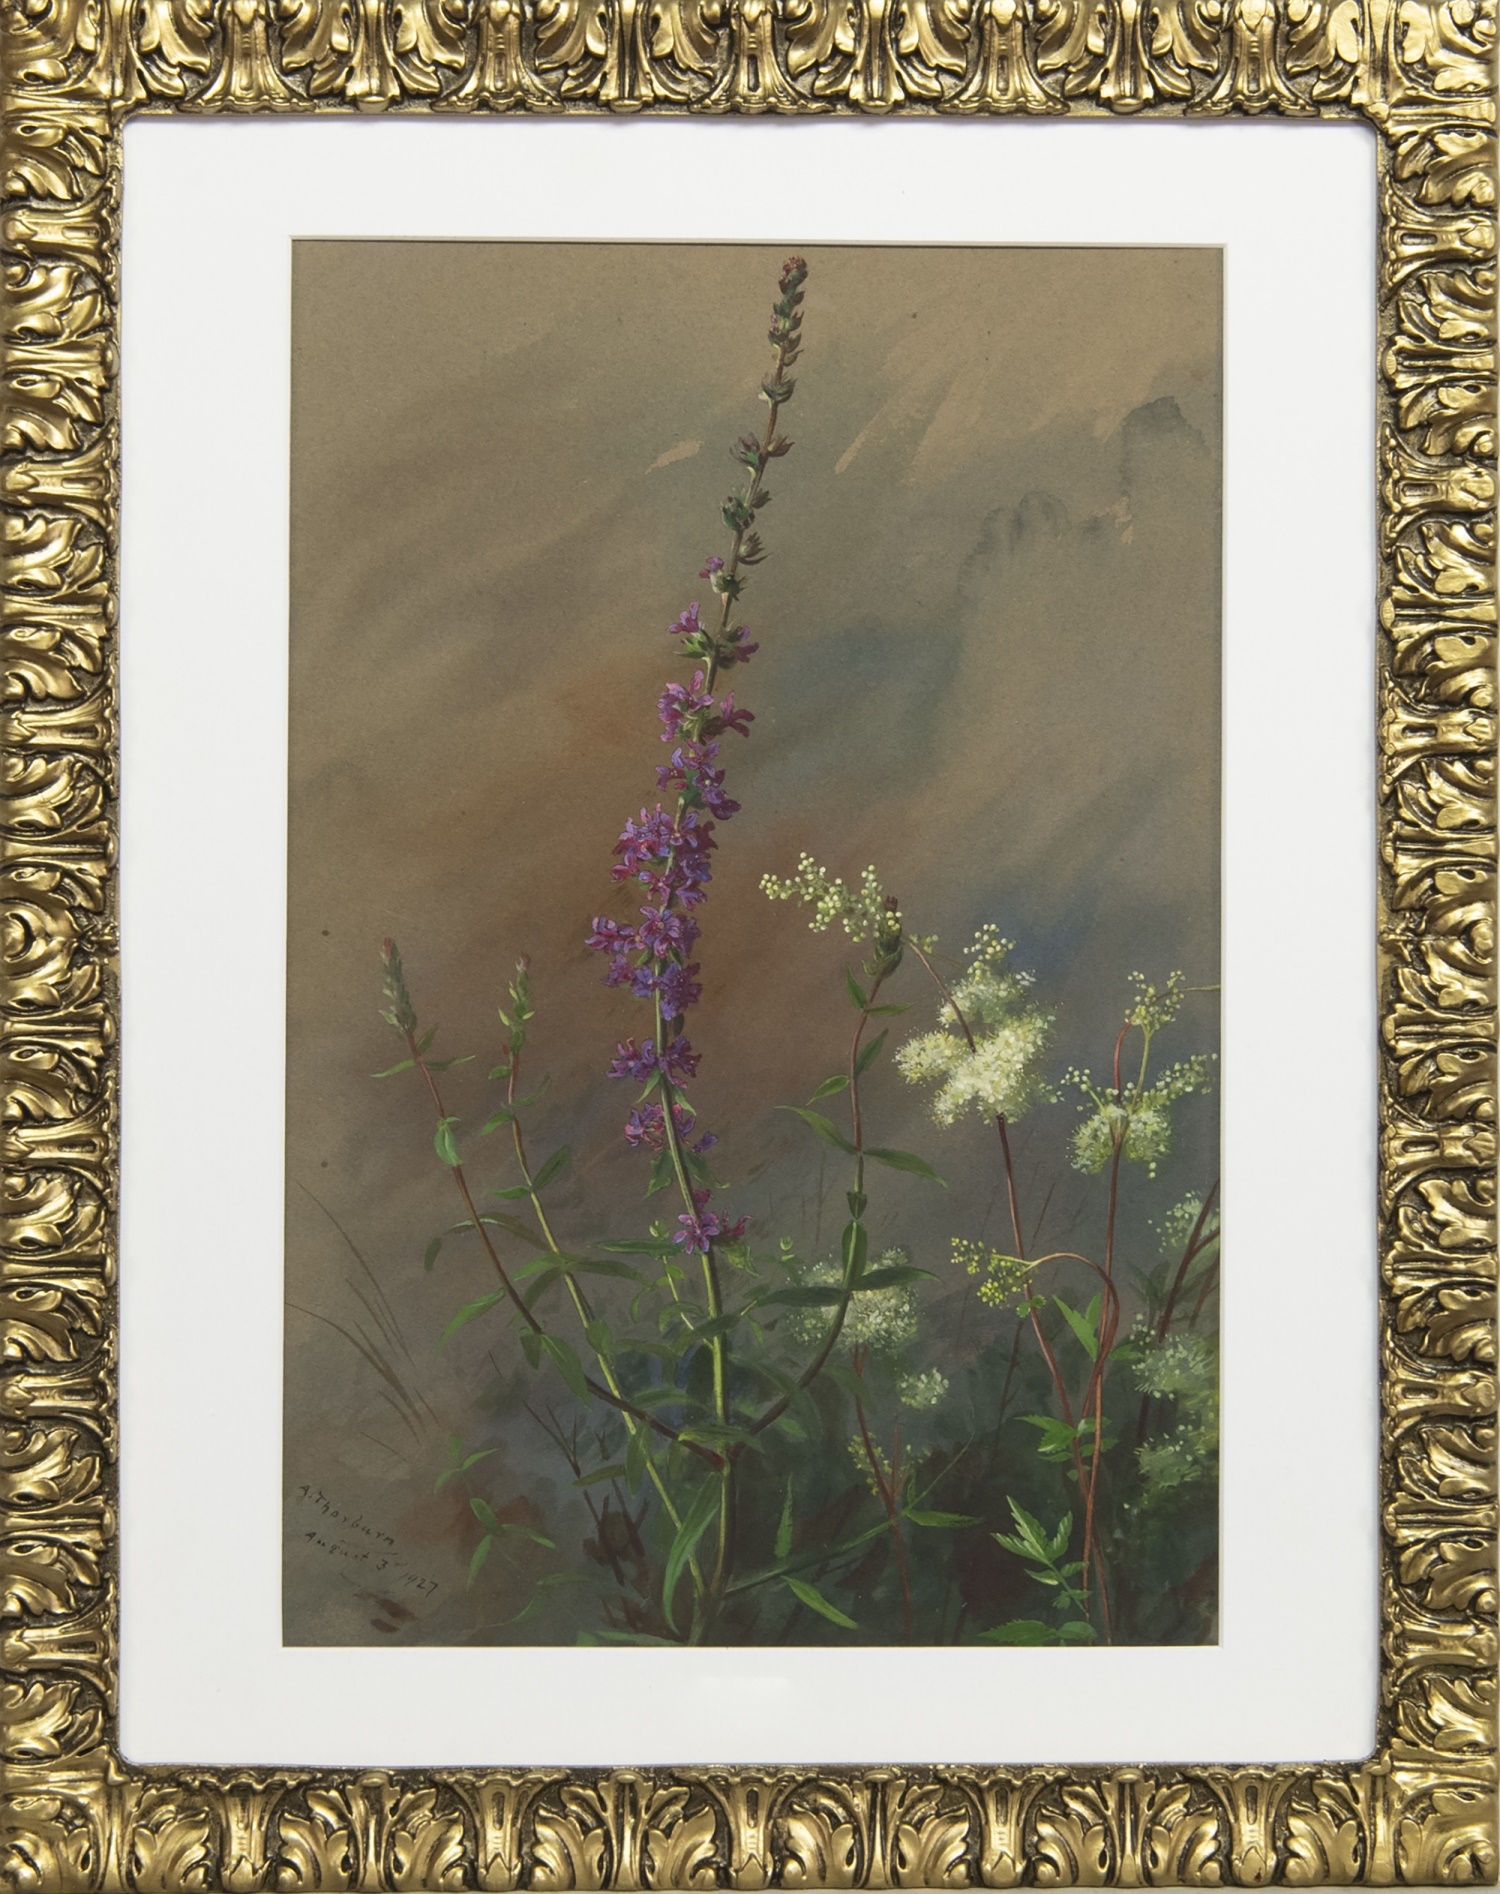 MEADOWSWEET AND PURPLE LOOSESTRIFE, A WATERCOLOUR BY ARCHIBALD THORBURN